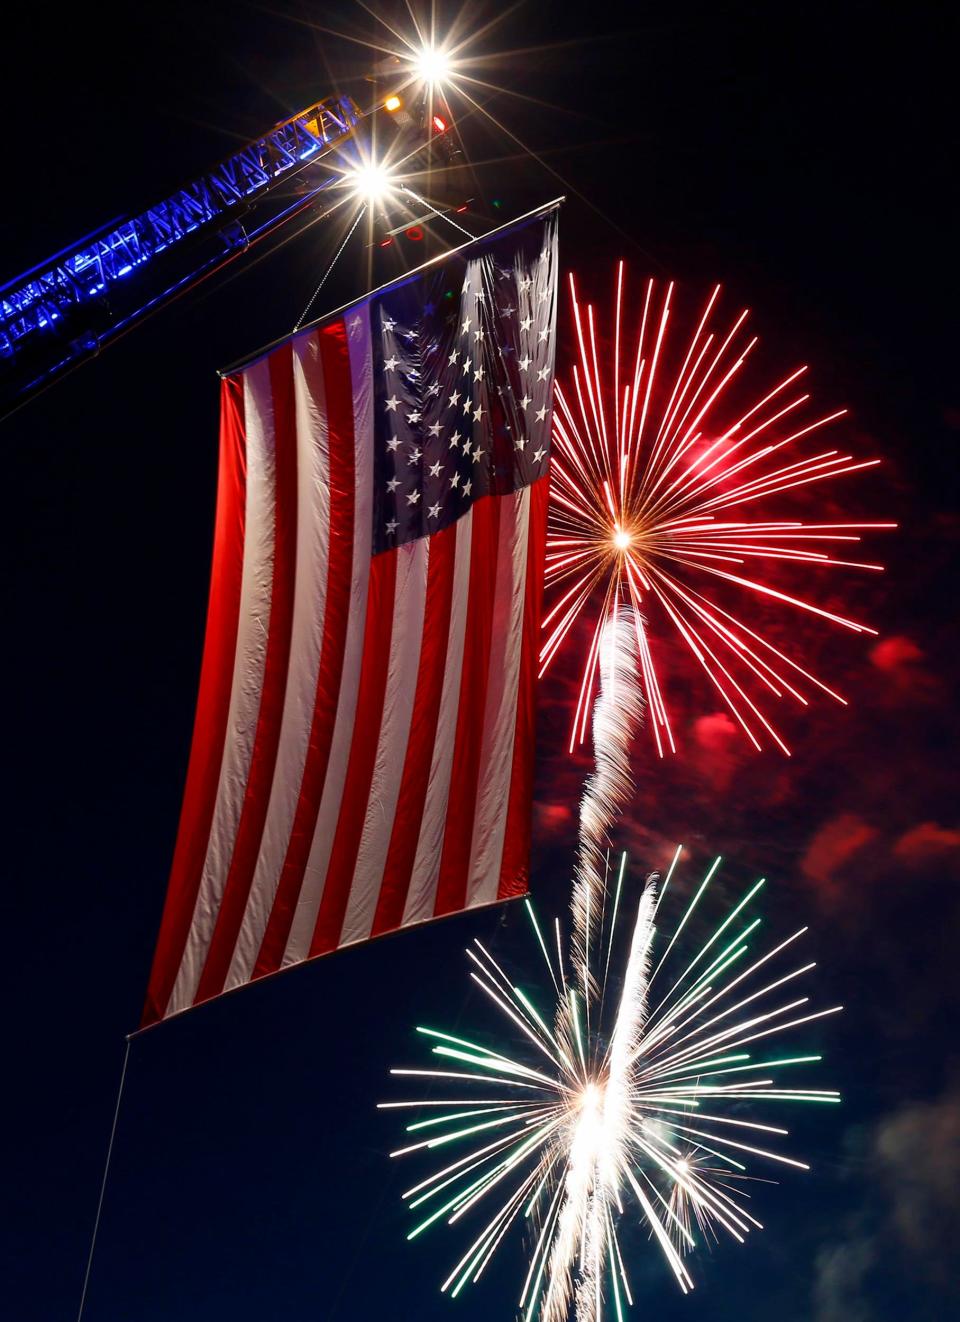 Fireworks fill the sky in 2019 behind a large flag hung from a Freehold Borough firetruck at Freehold Raceway.